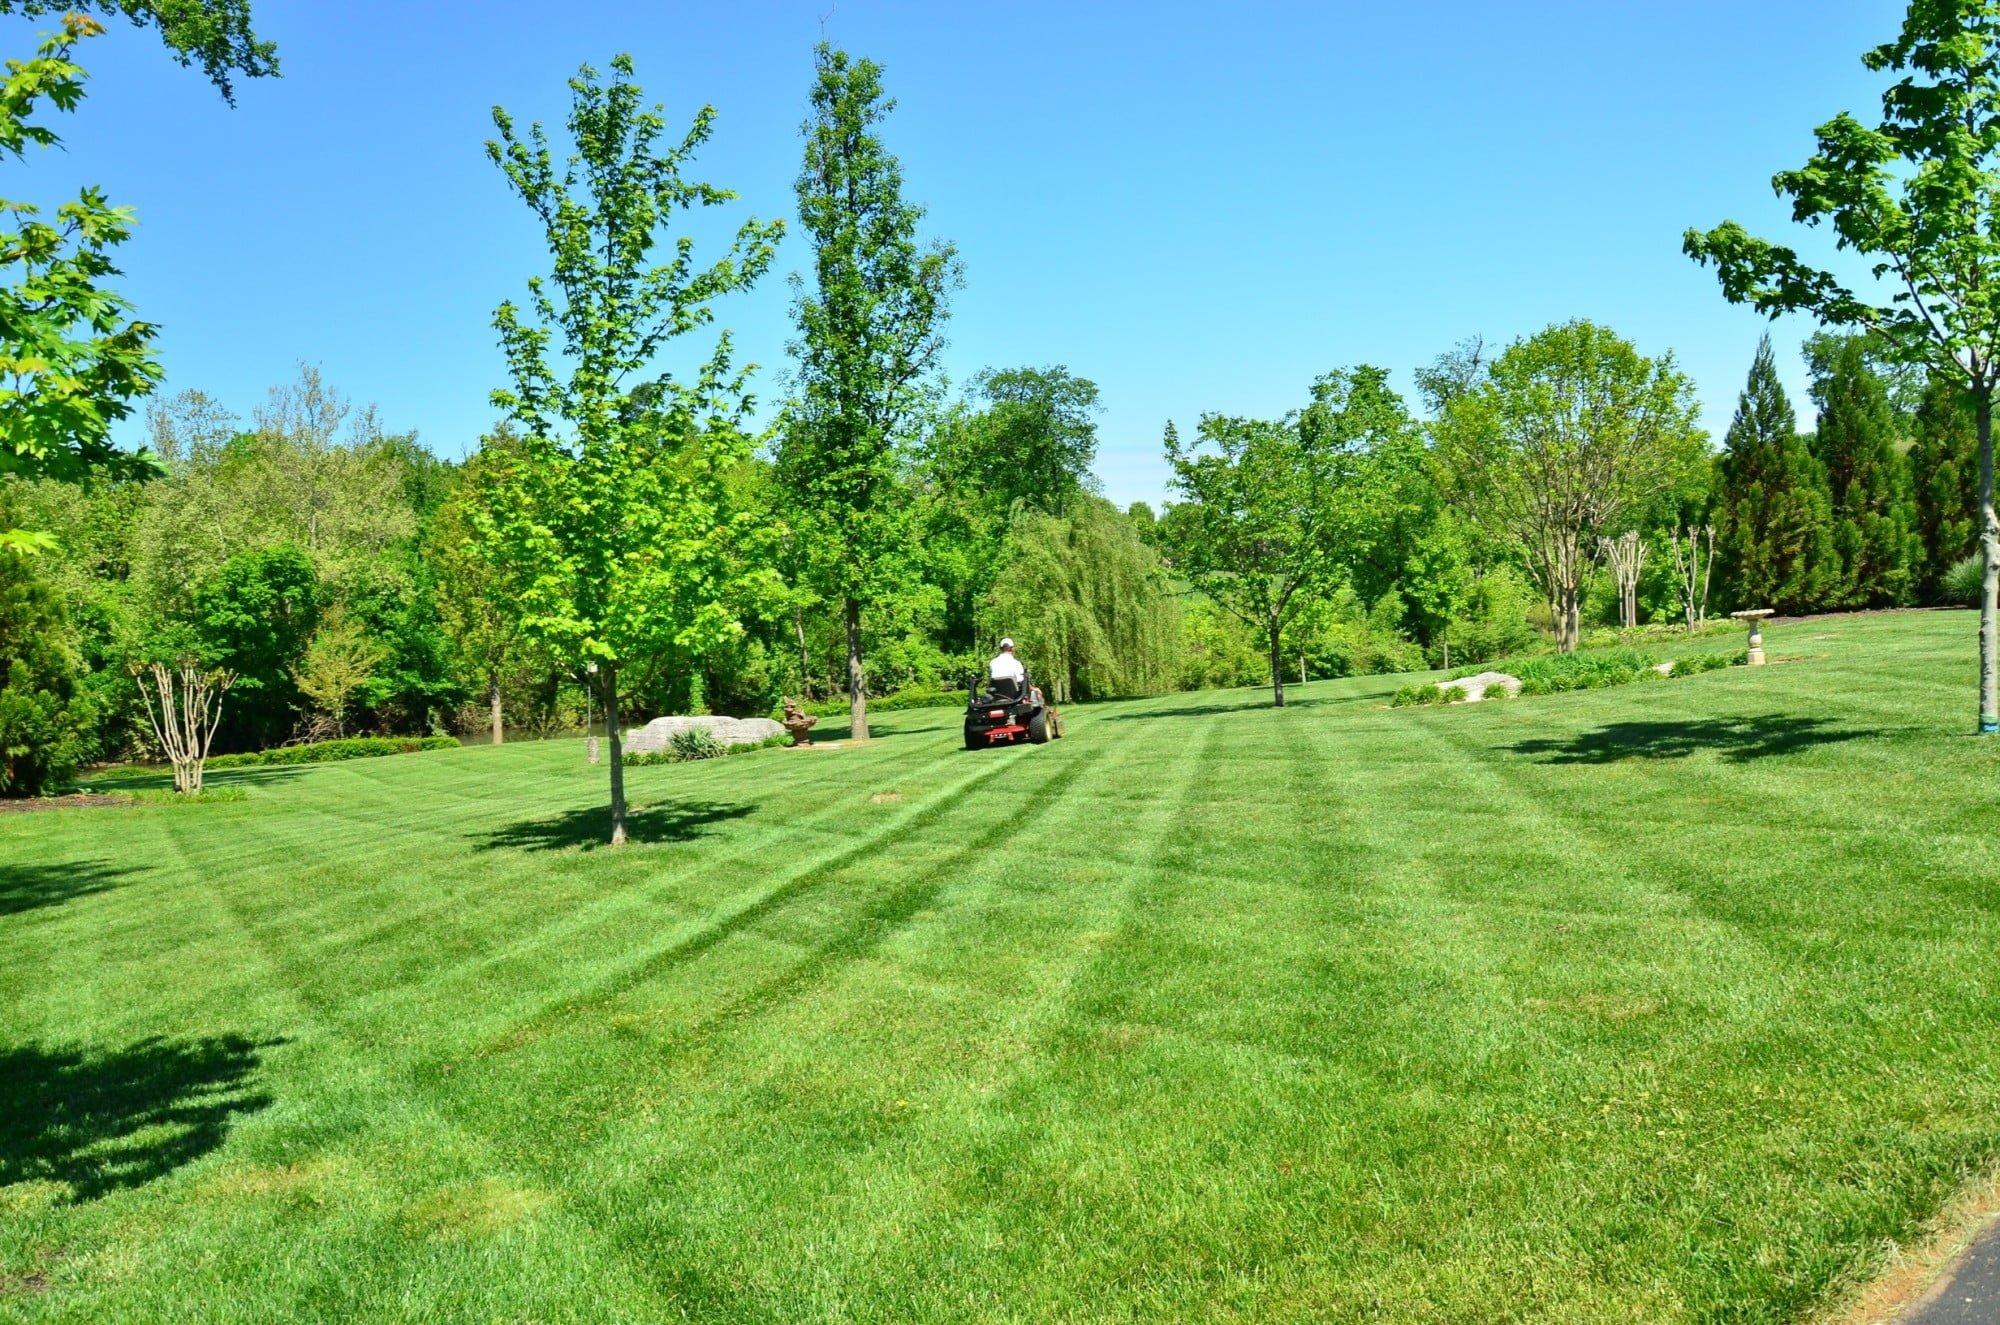 Do you need to hire the best local landscapers to take of your lawn? Here are a few questions that you should ask the best lawn care company when hiring them.